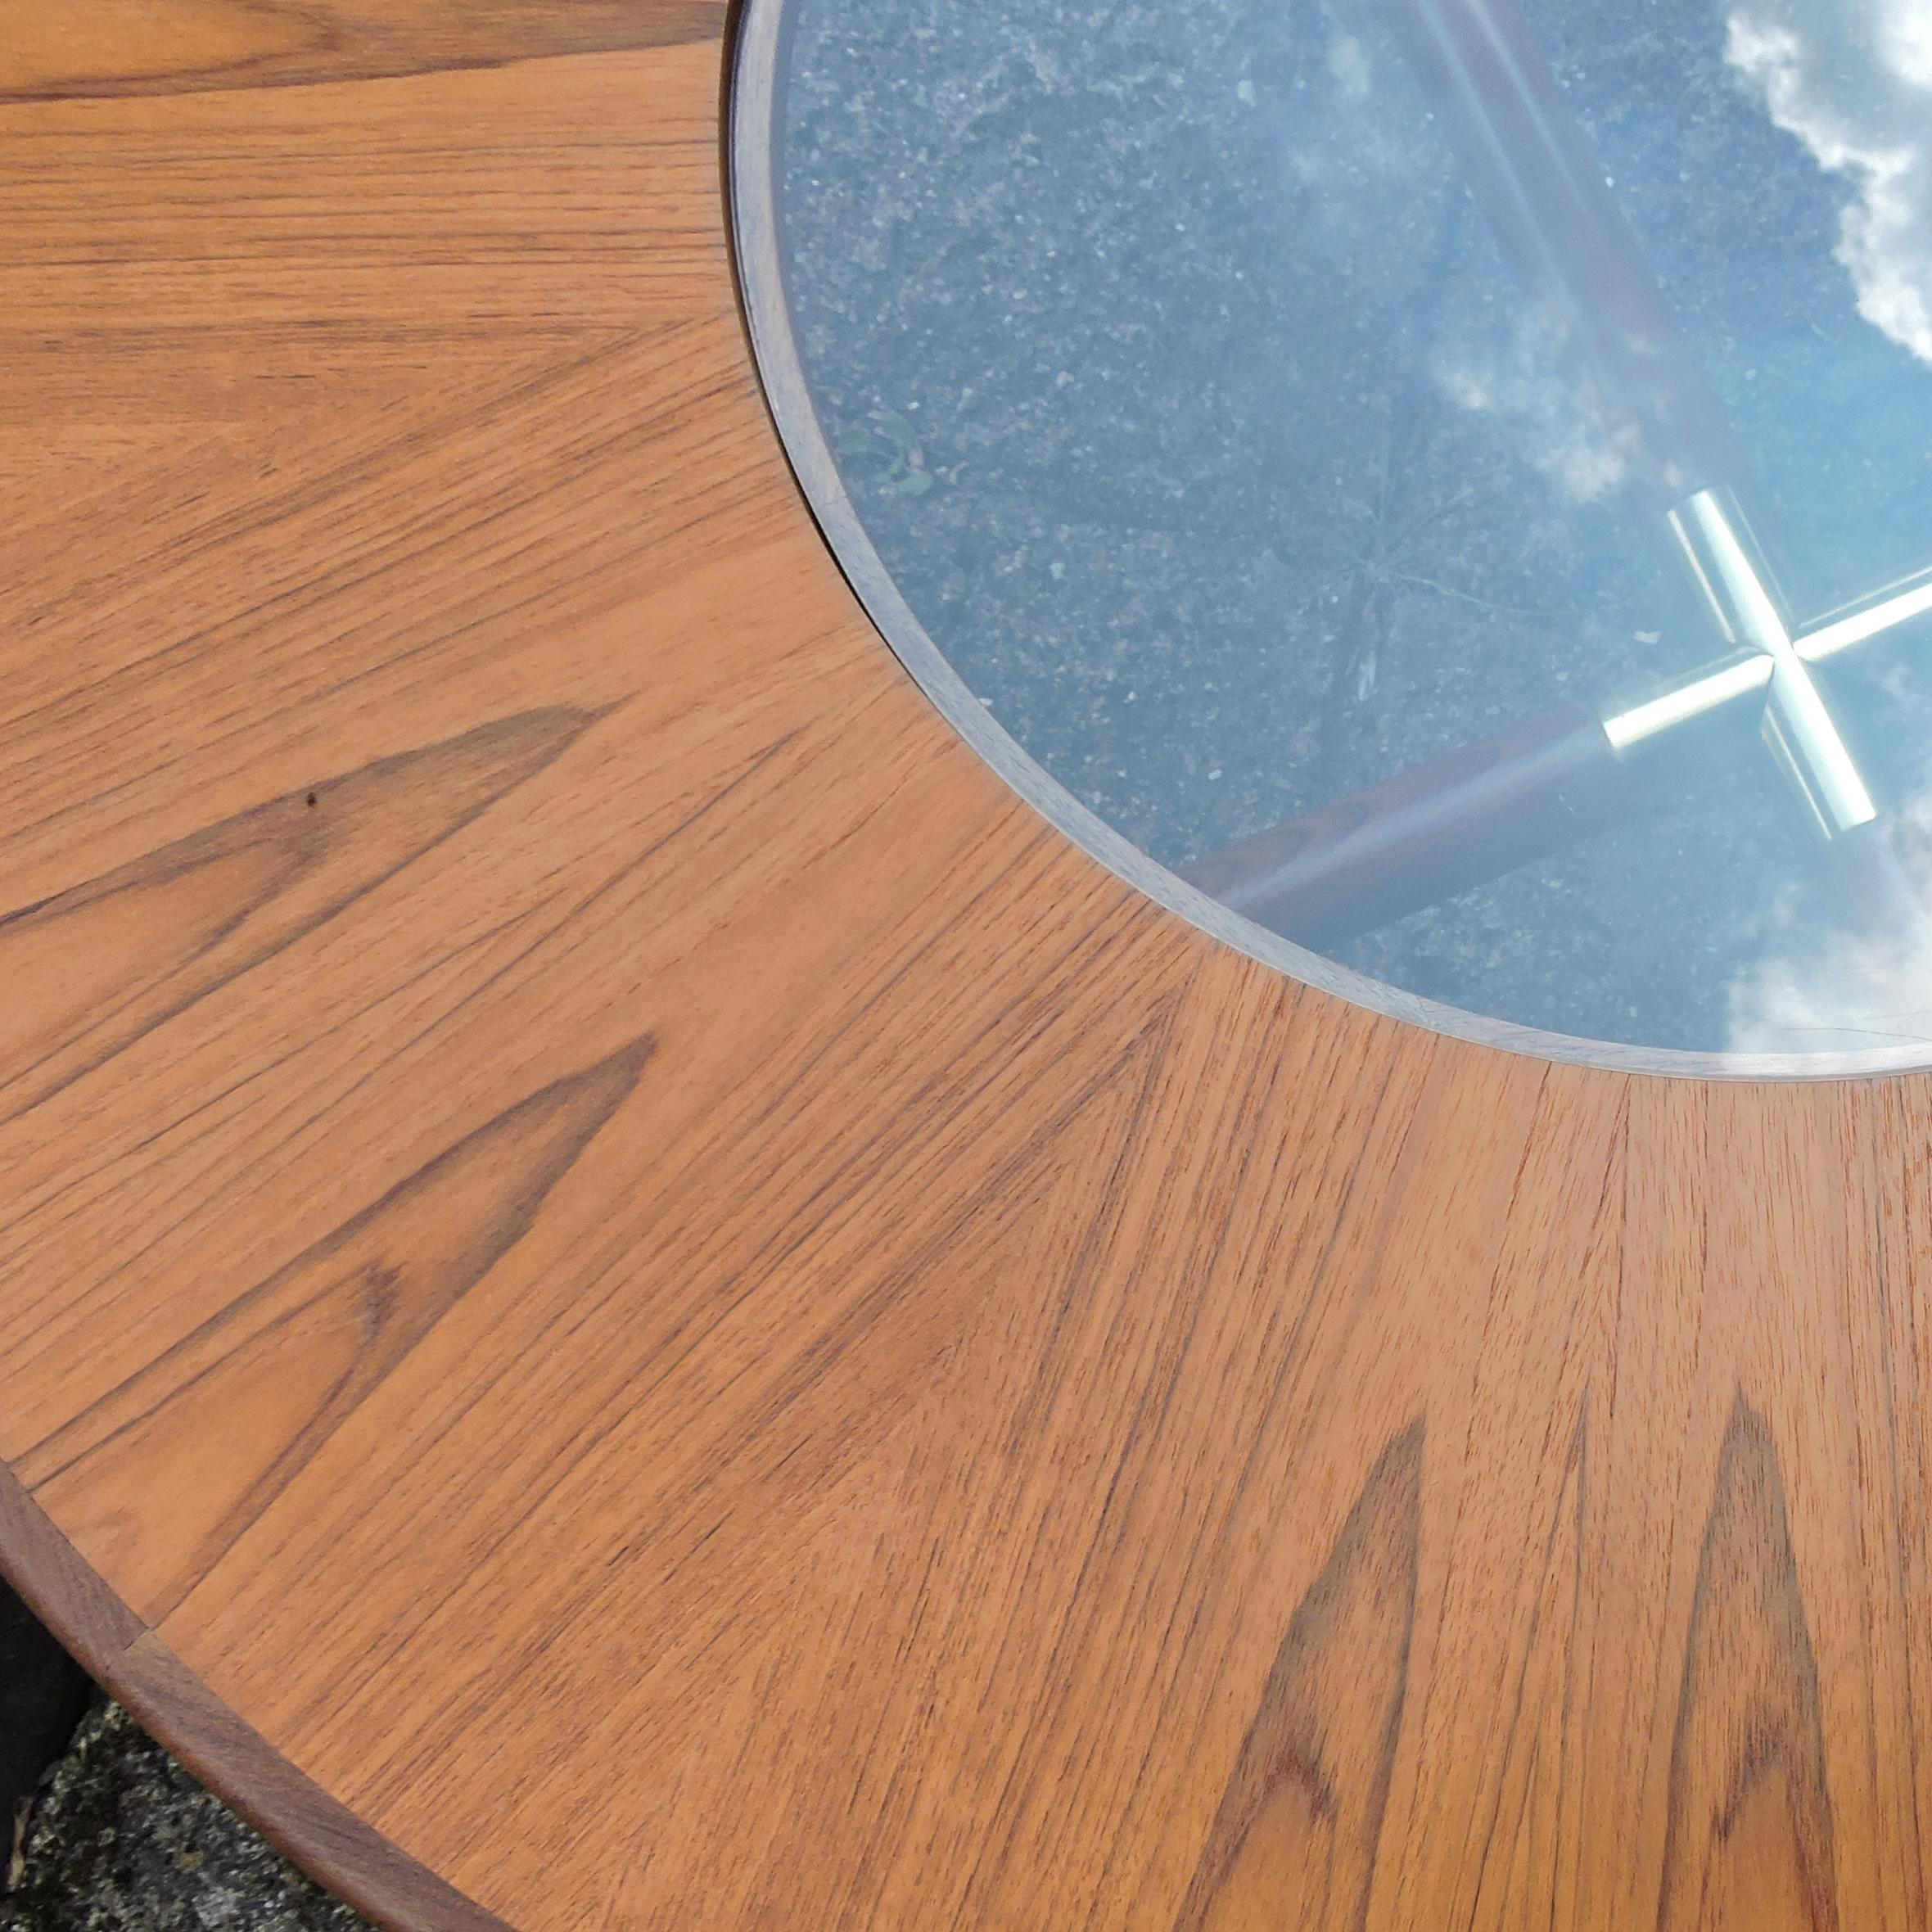 Midcentury Round Teak and Glass Coffee Table from G-Plan In Good Condition For Sale In Chesham, GB